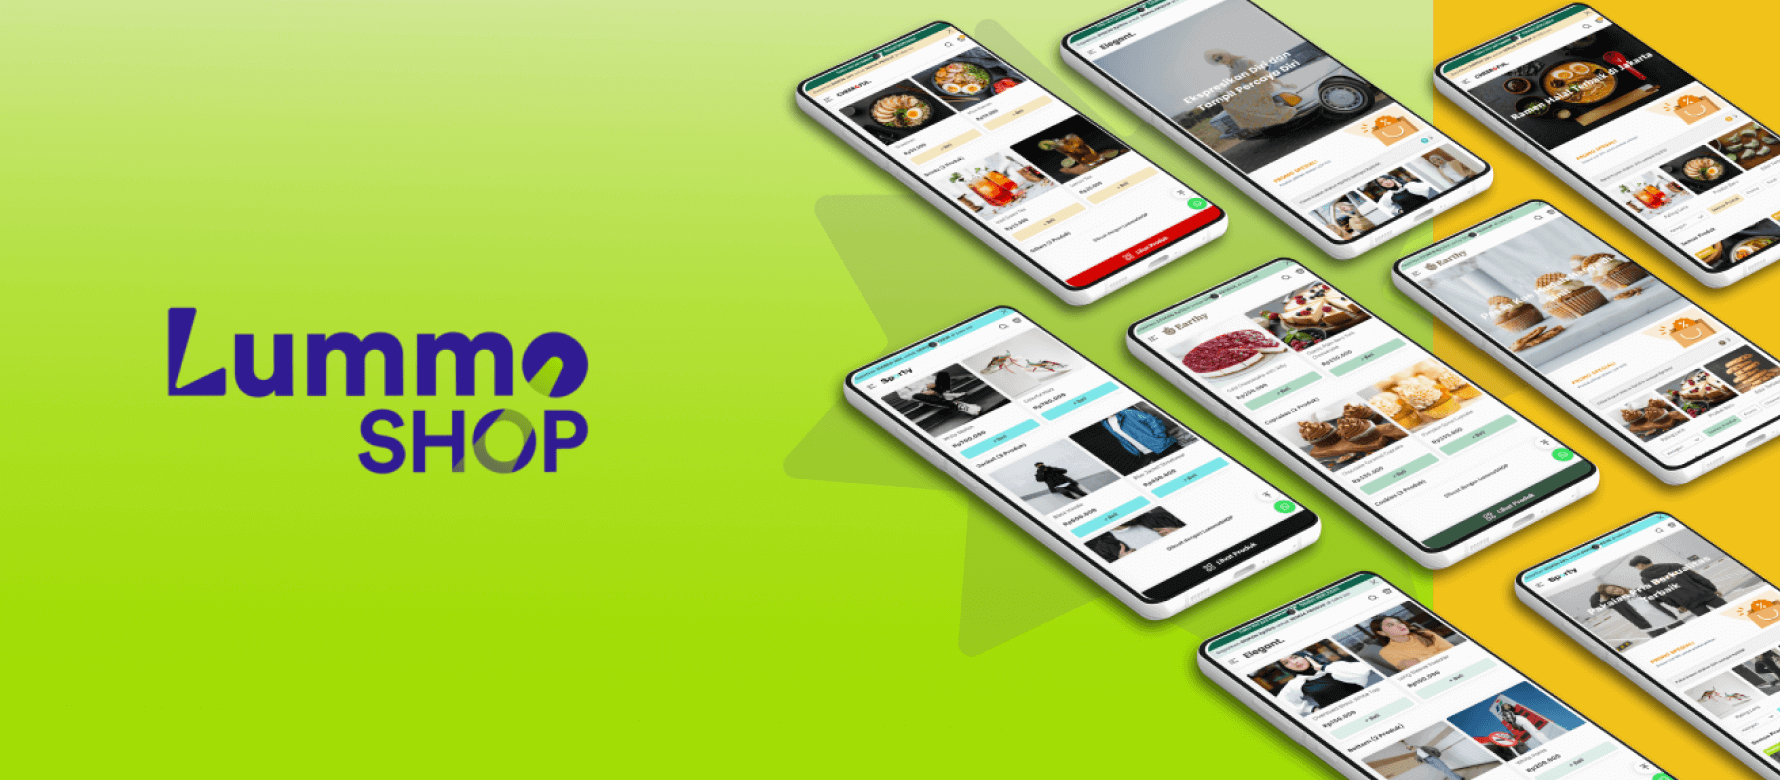 Case Study | Home page design of Lummoshop, Indonesia's largest D2C SaaS E-Commerce platform, that empower entrepreneurs and brands in SEA to accelerate their growth and to serve their customers by giving them the best technology